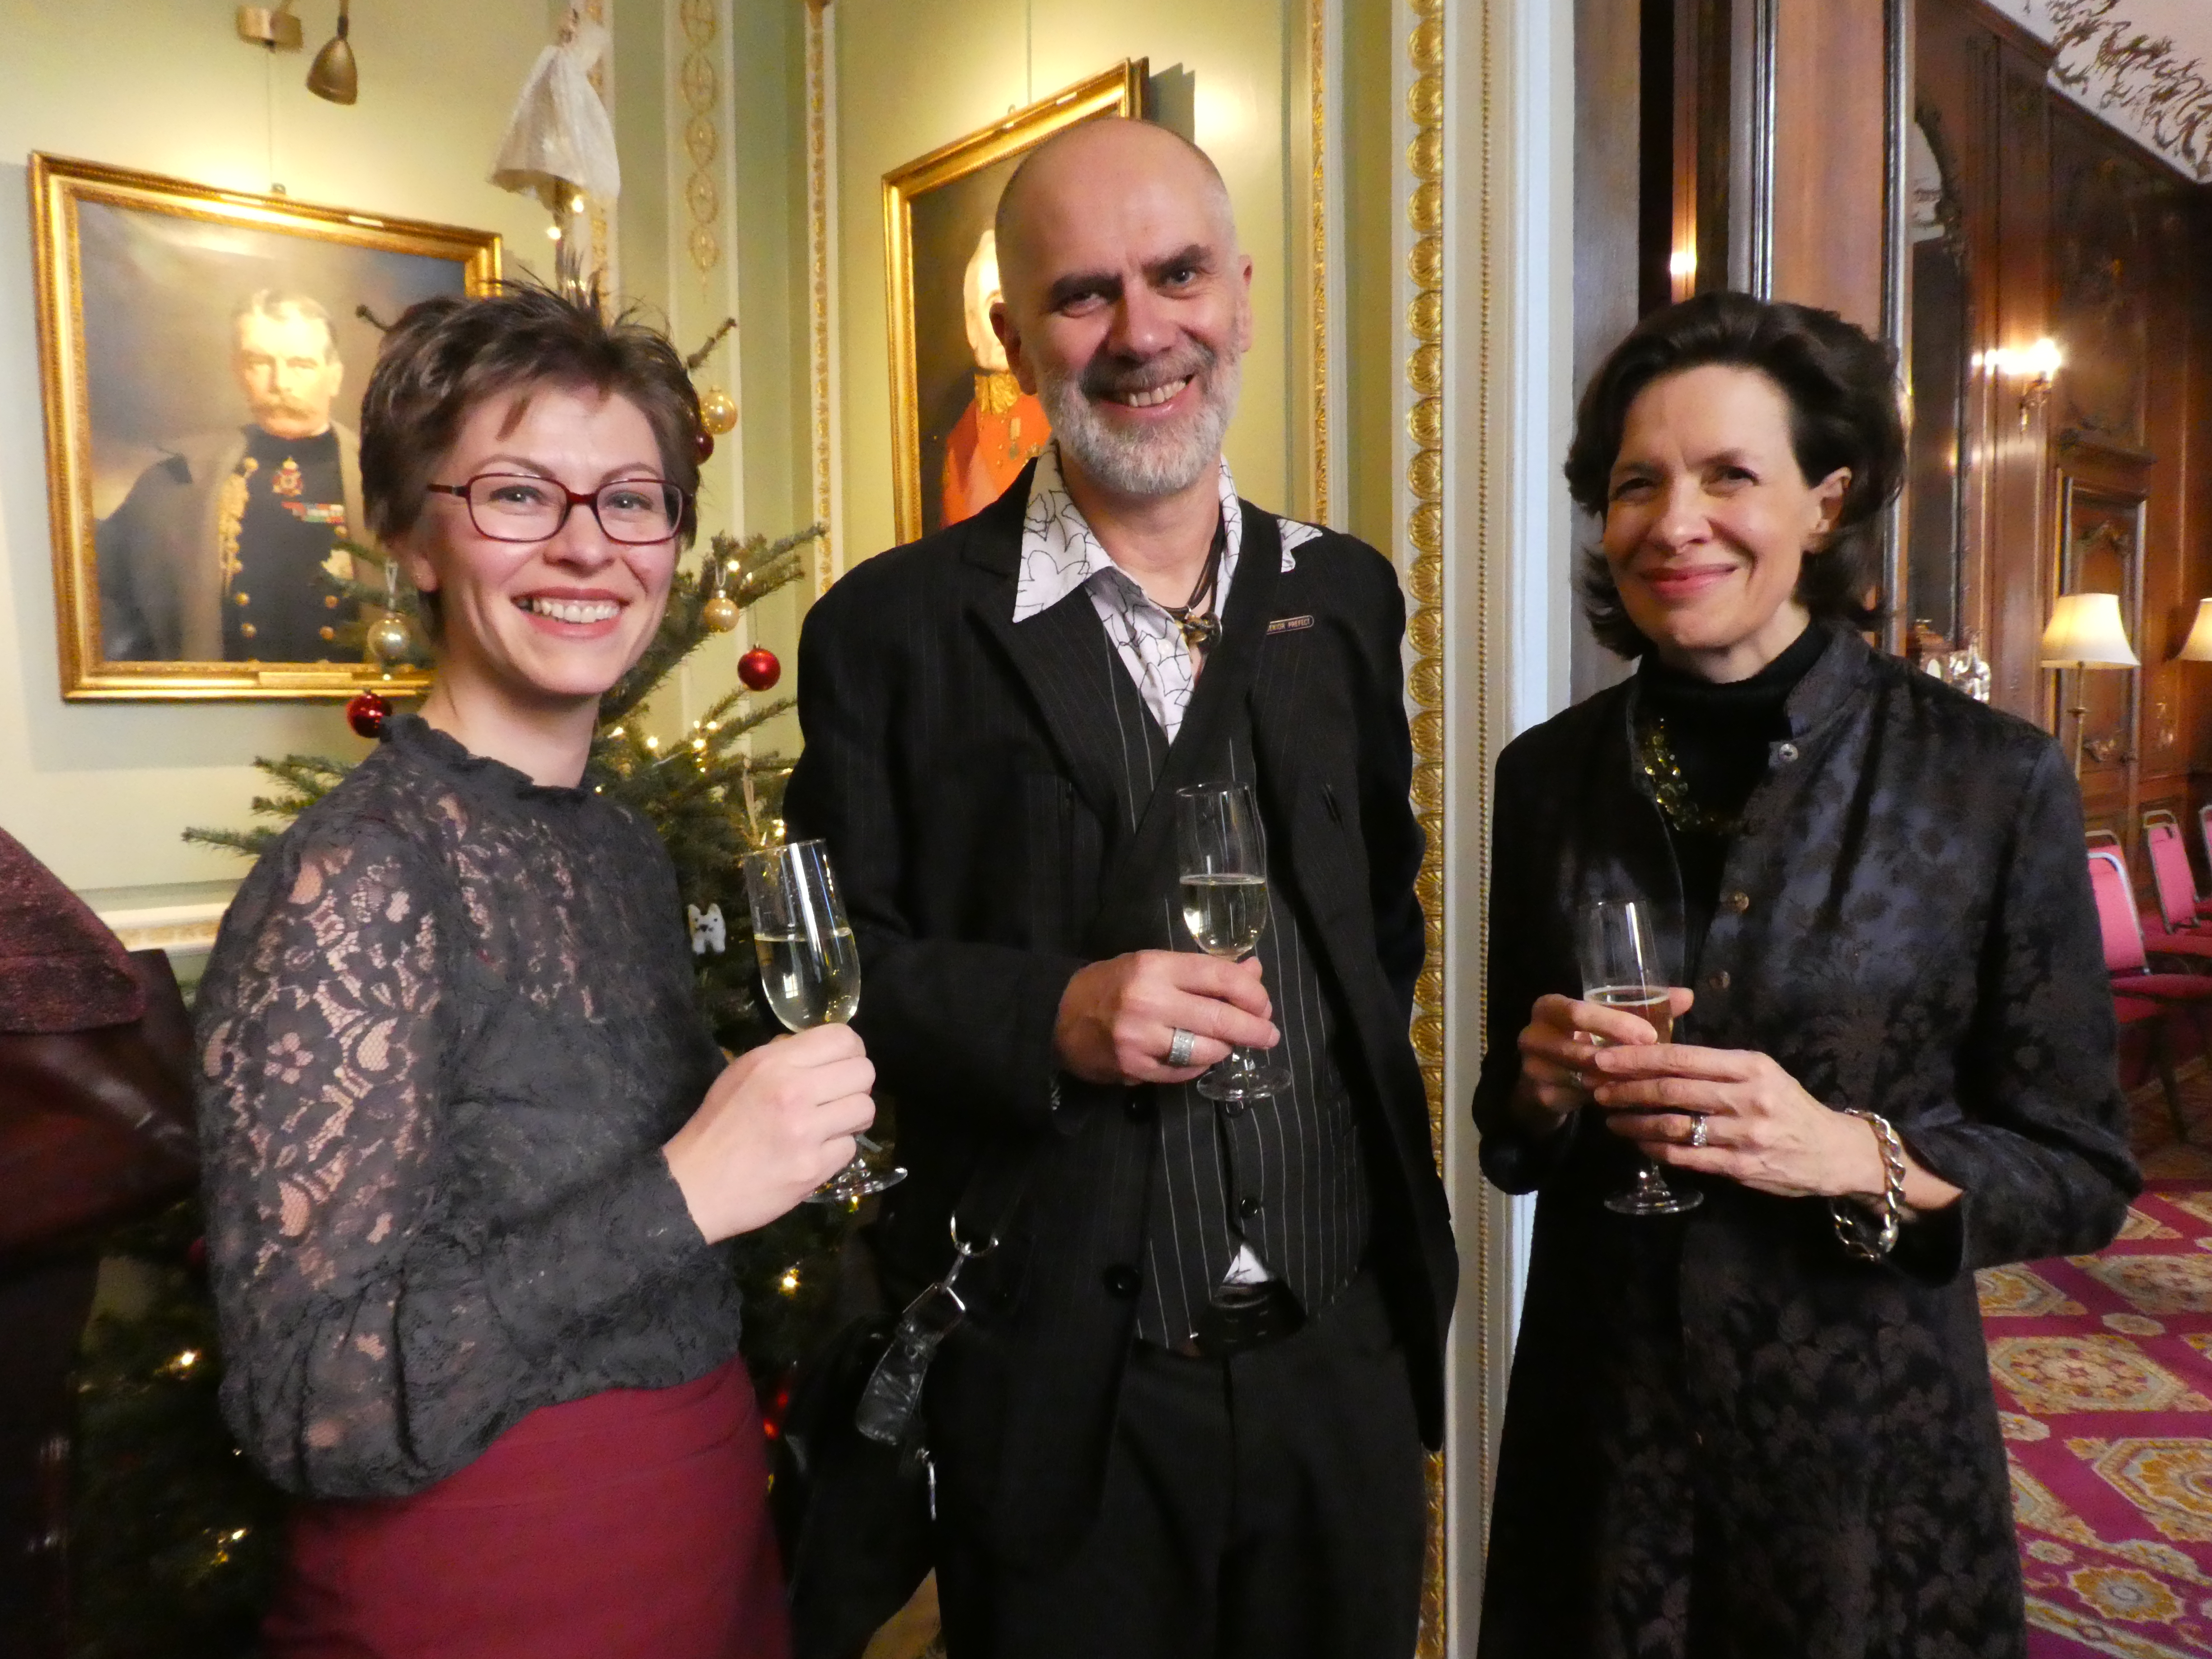 Above: Lisa Shoesmith (left) with David Hicks (founder of Really Good/Soul) and GCA’s Amanda Fergusson at the recent Past Presidents Annual Luncheon.